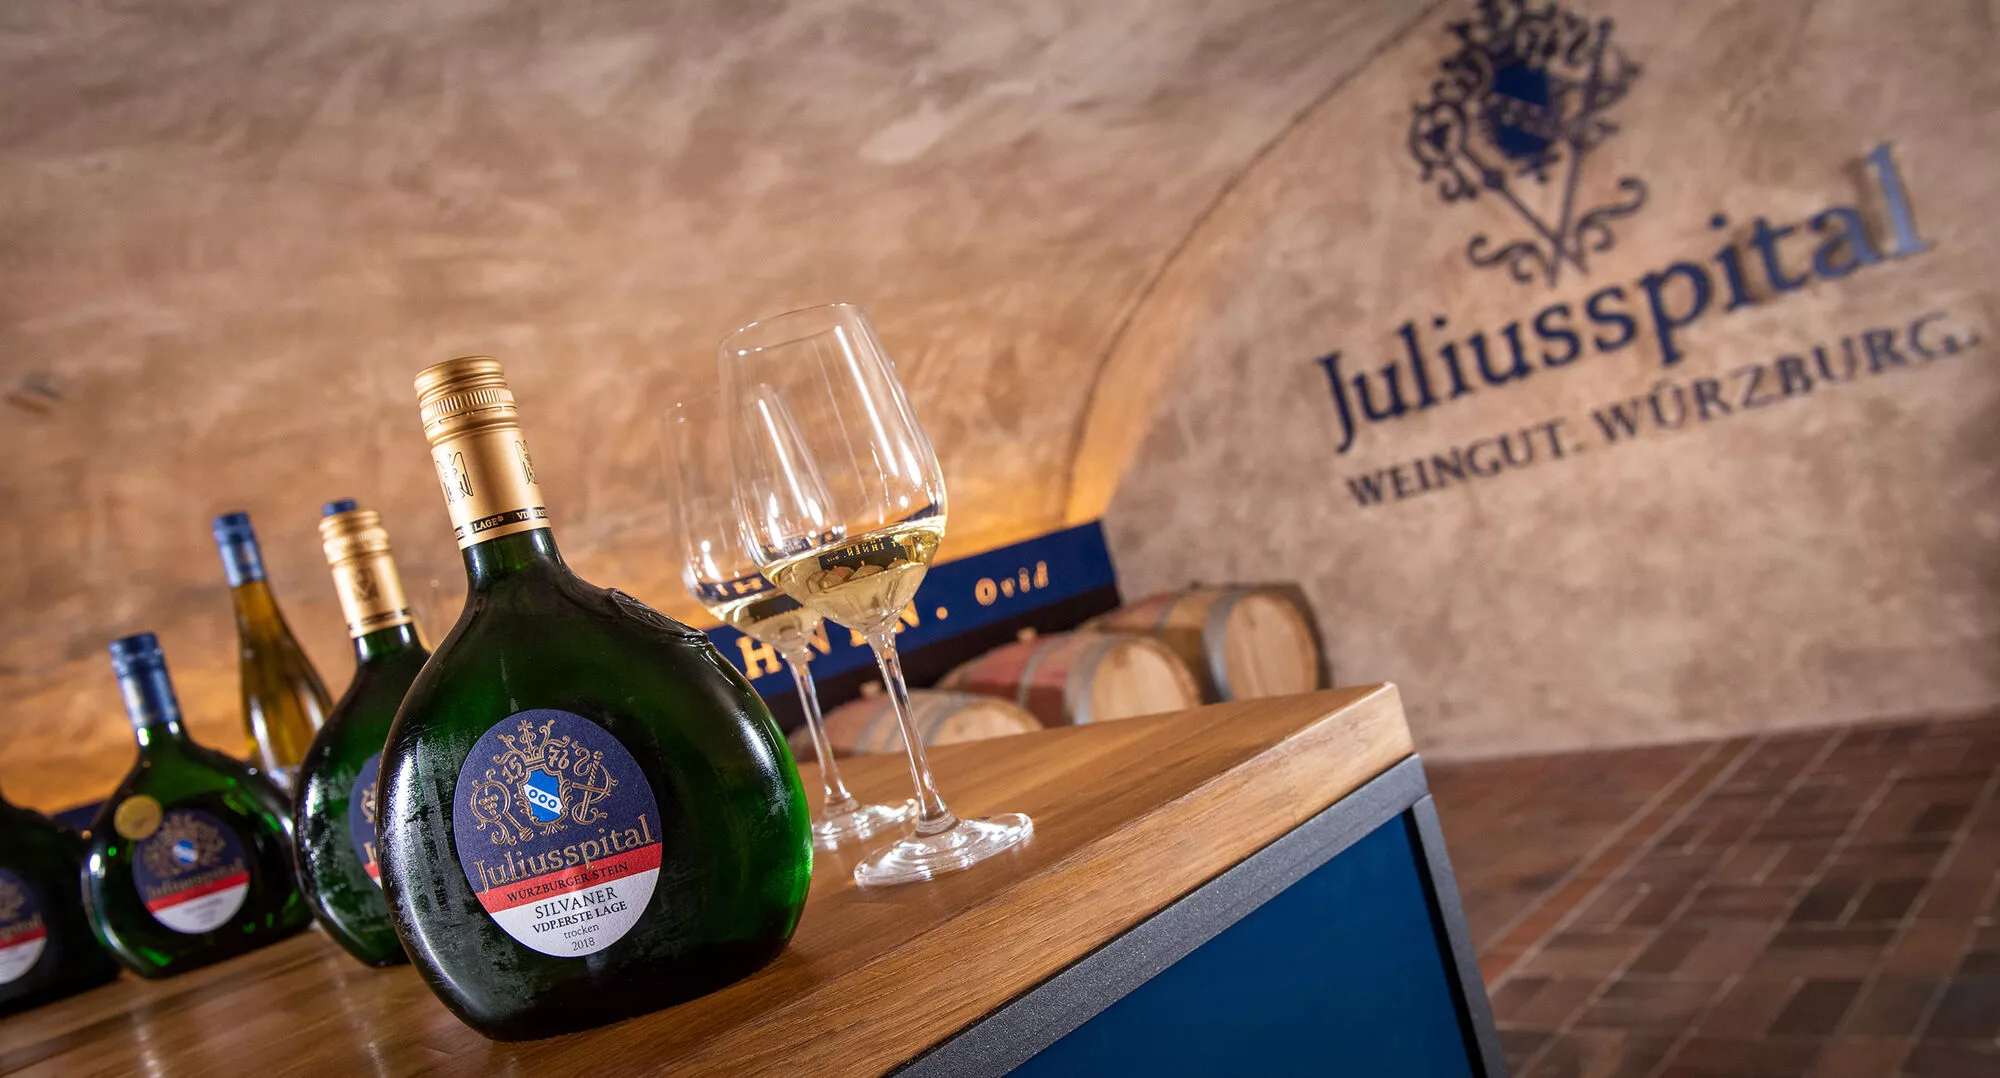 Juliusspital Winery Wurzburg in Germany, Europe | Wineries - Rated 0.8